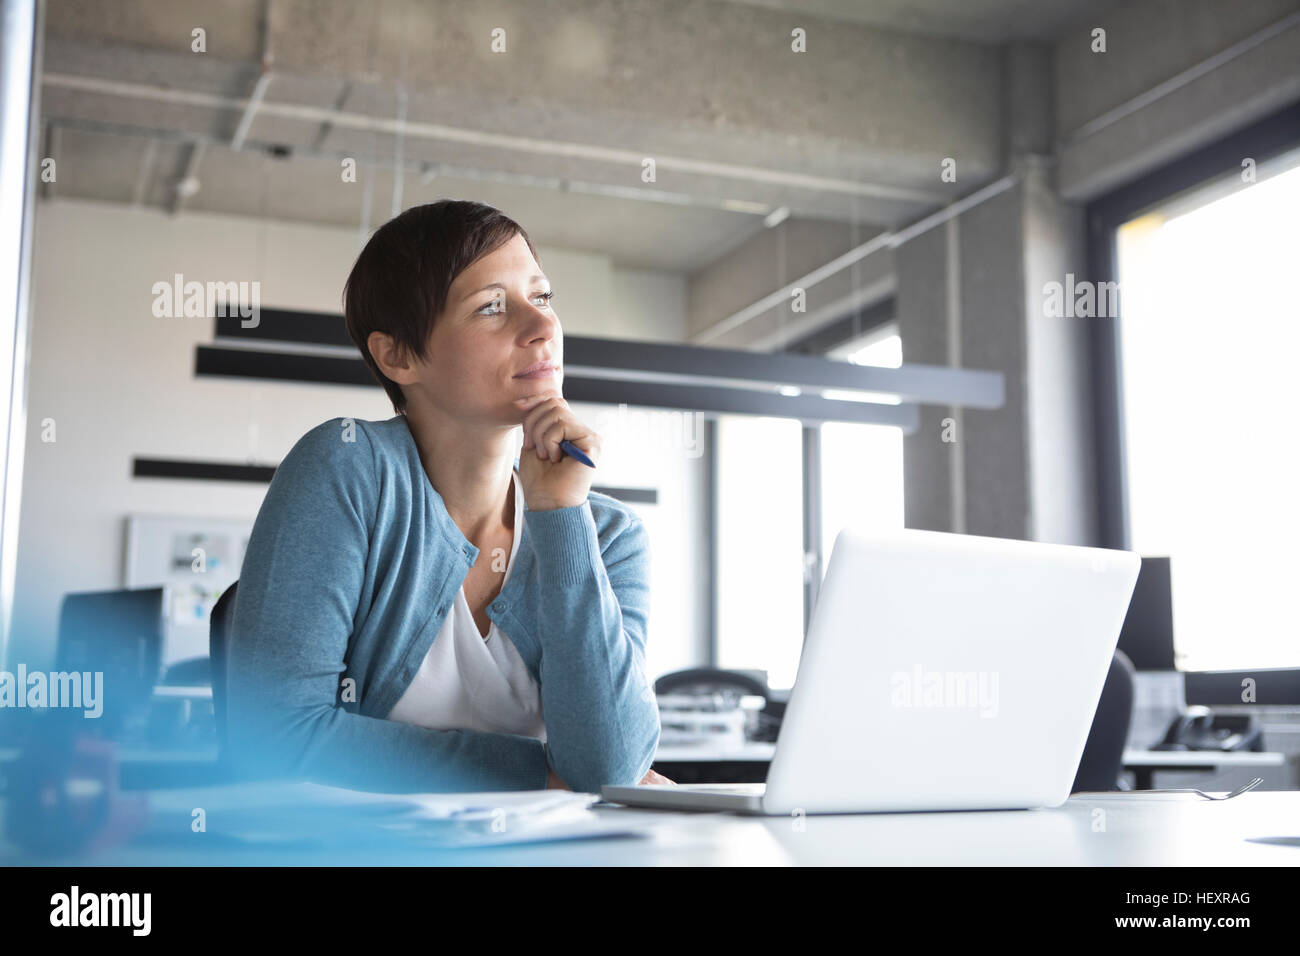 Businesswoman in office with laptop thinking Stock Photo